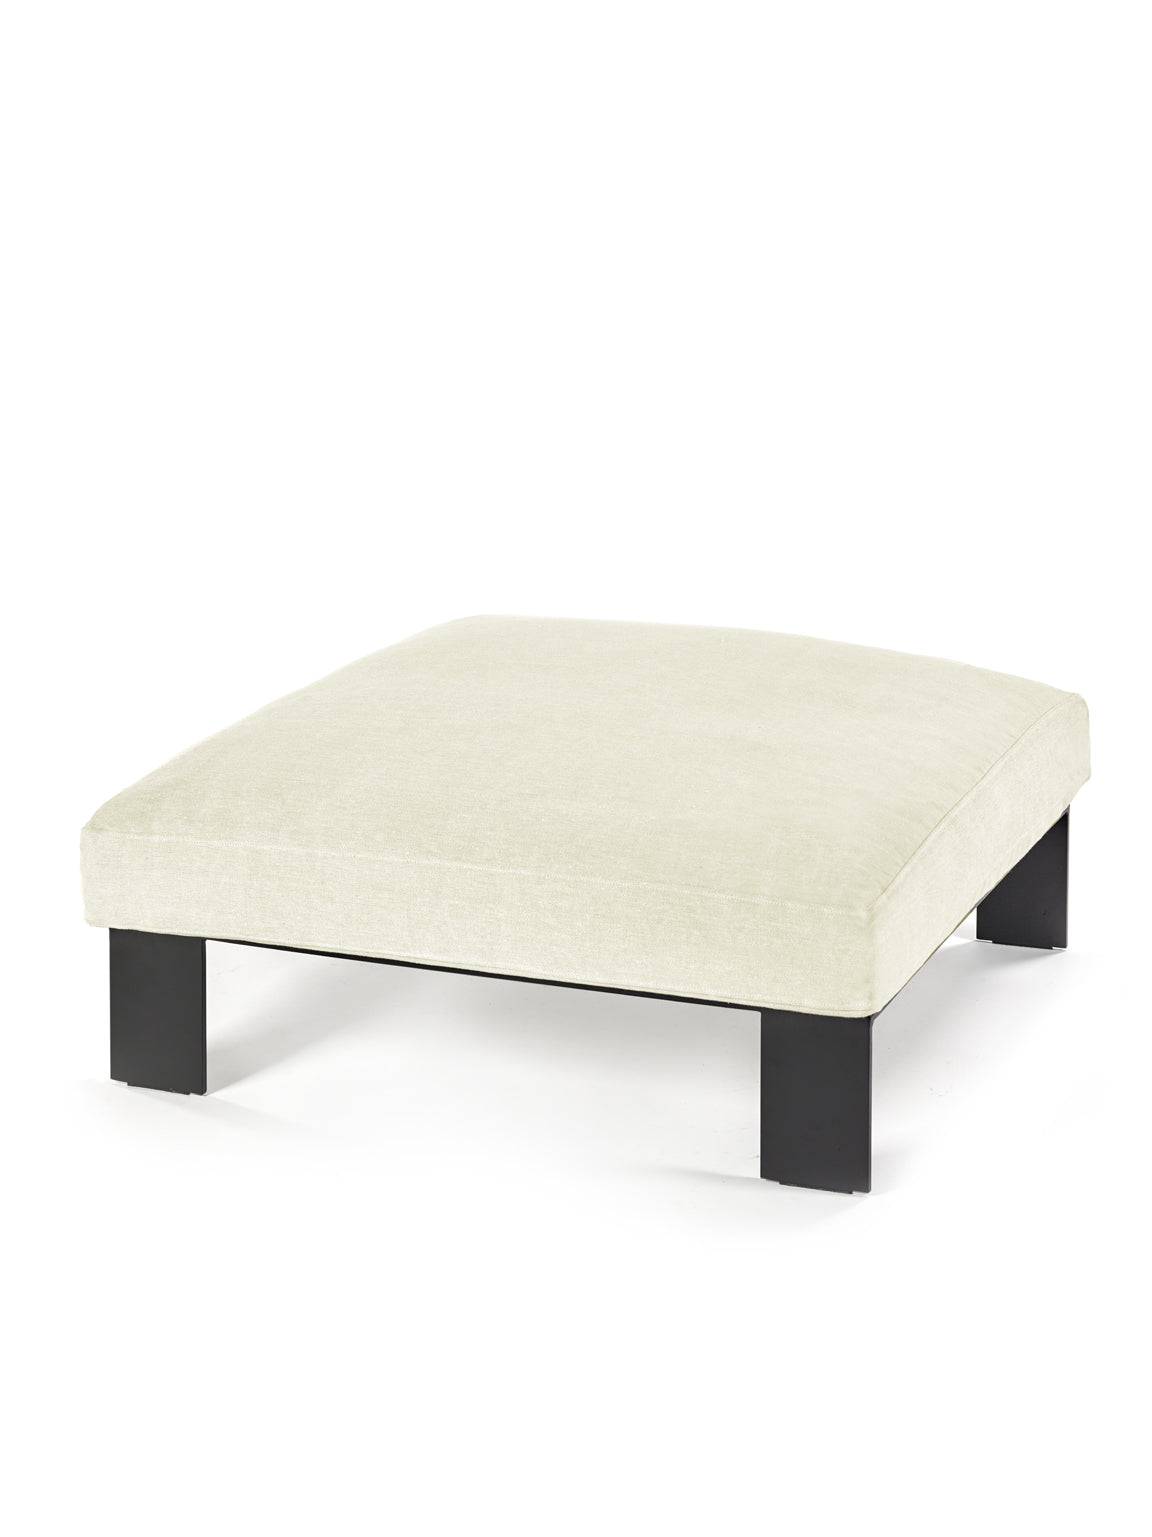 Mombaers Ottoman - White - THAT COOL LIVING